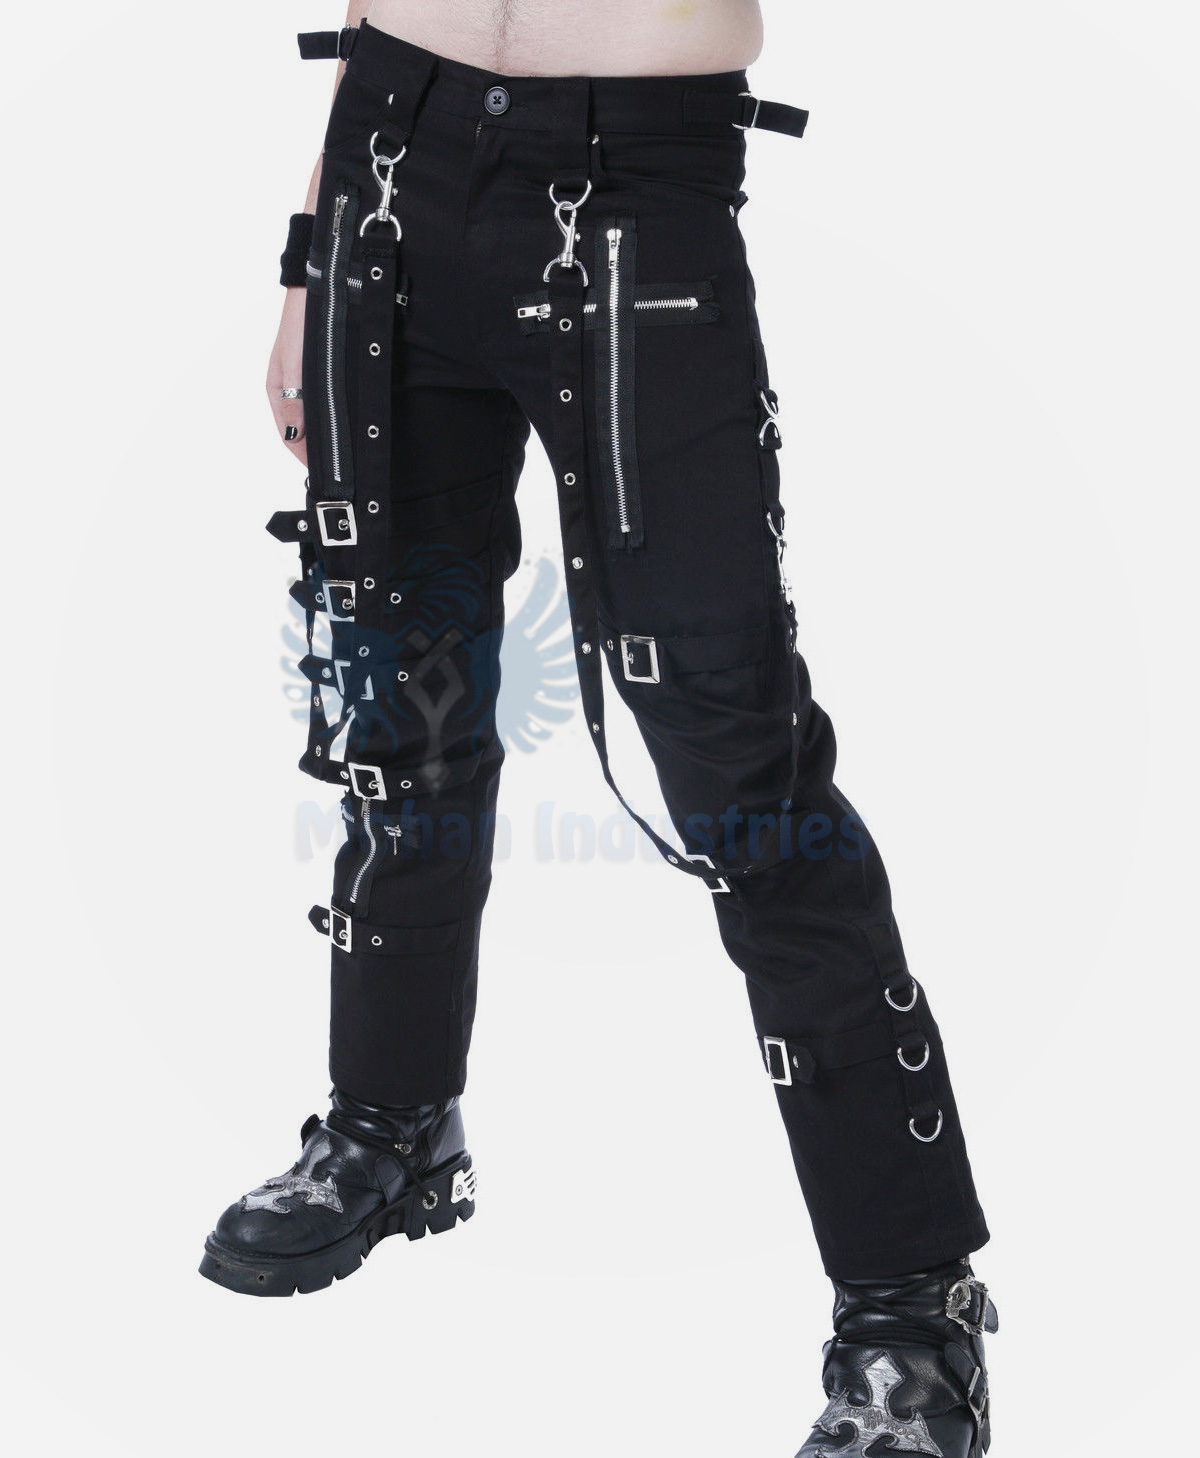 mi-419i-black-buckle-zips-chains-straps-trousers-pants-cyber-goth-rave